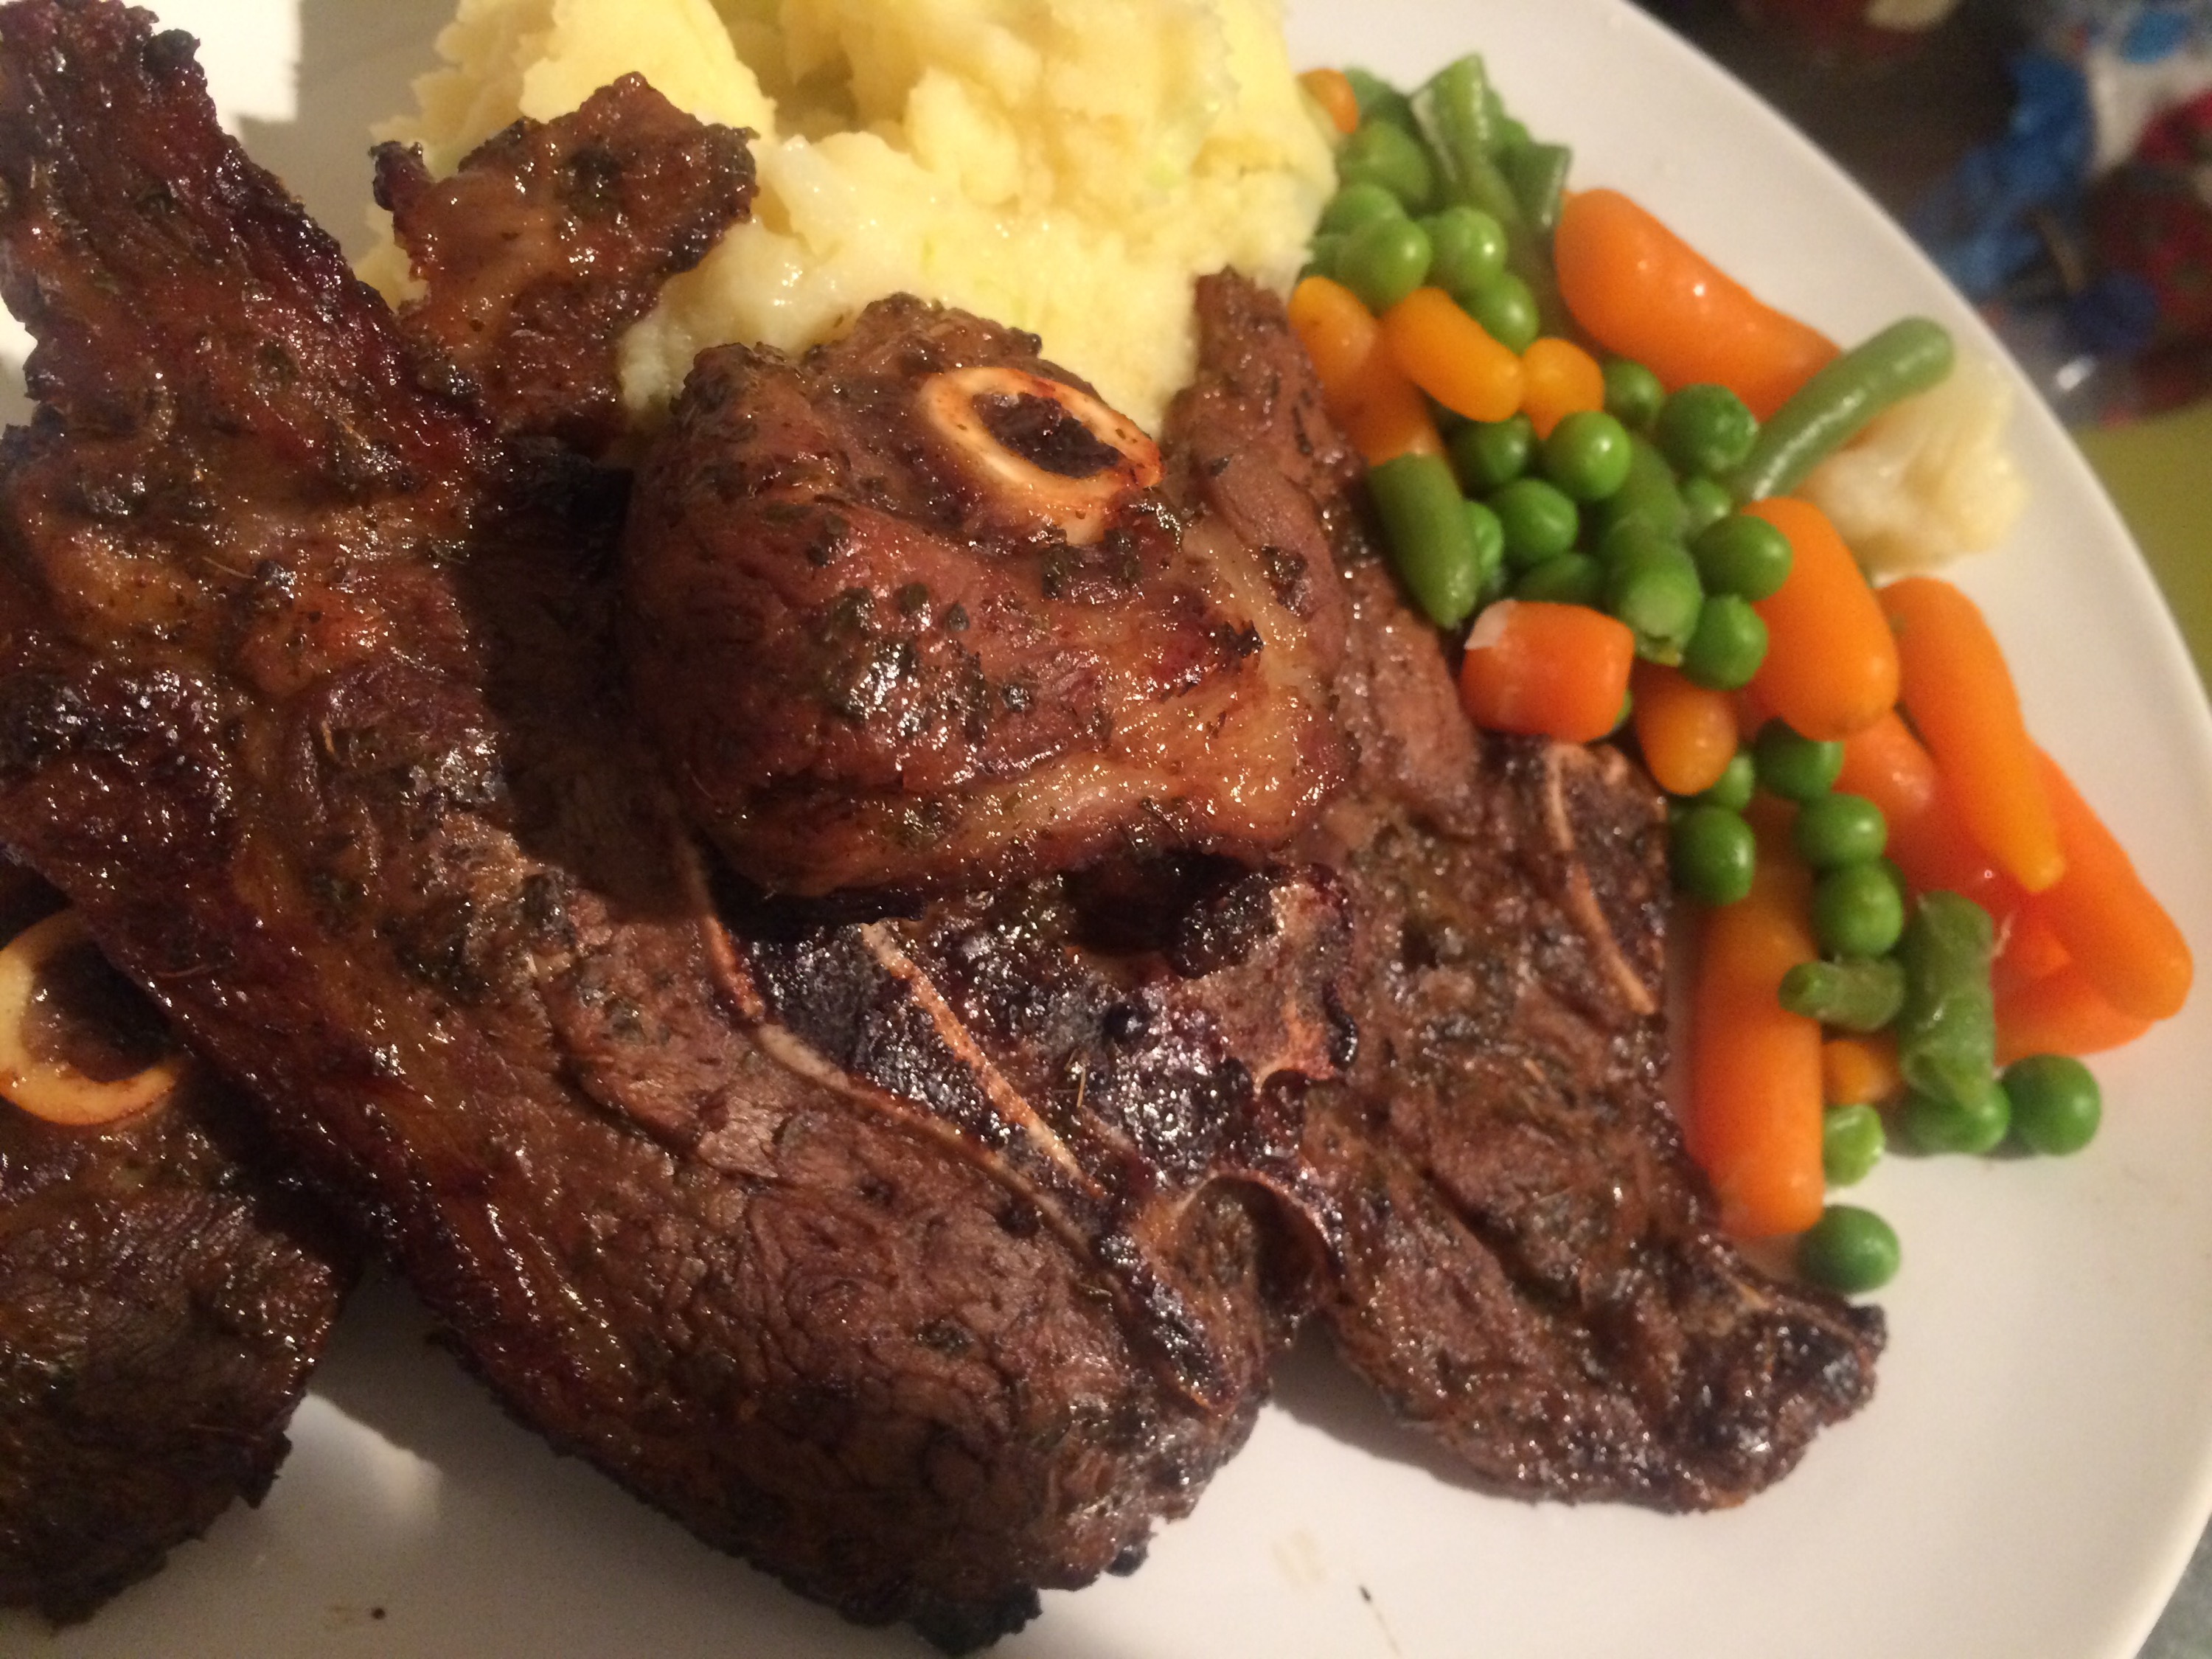 Quick fire posts no1 minty lamb chops mashy and veg or meat and at
least two .. 